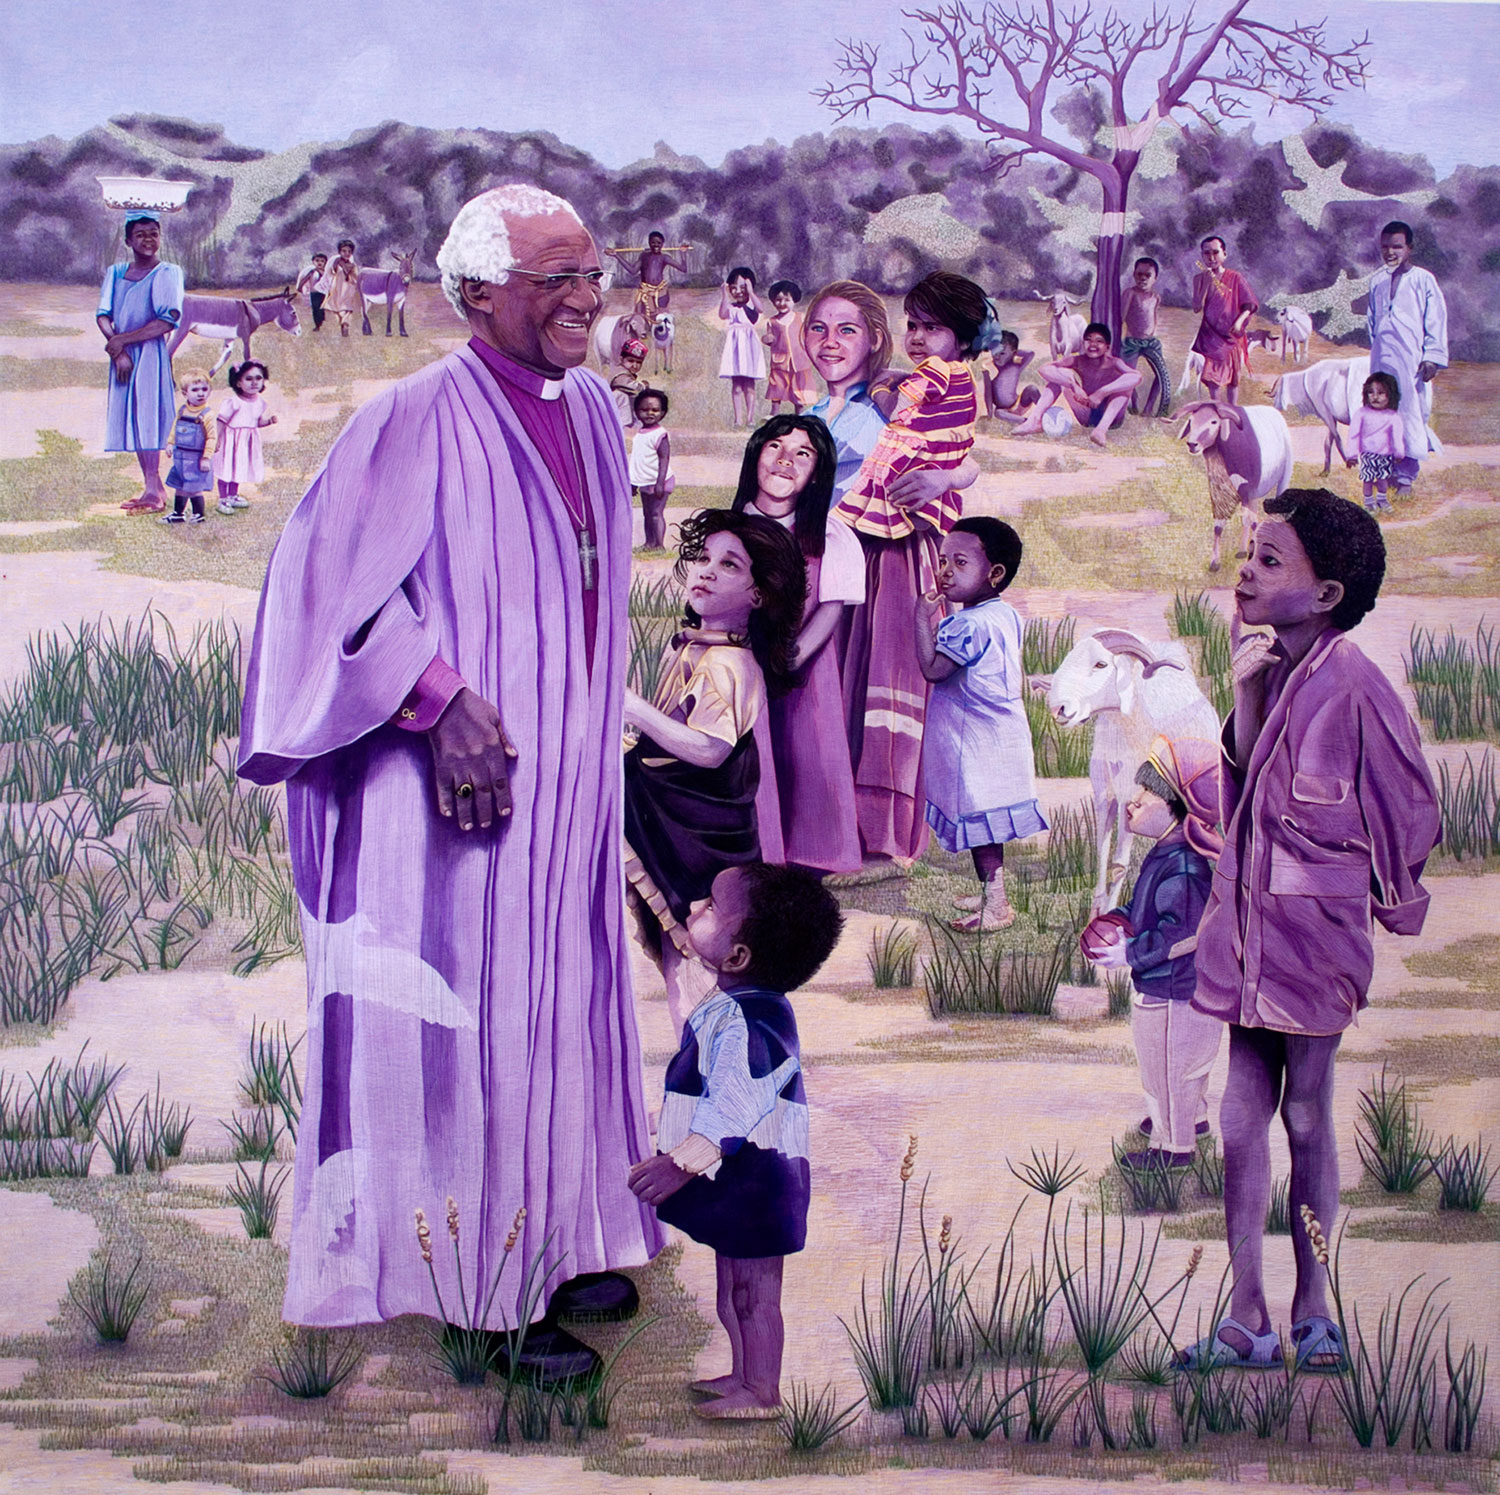 several people in a field surrounding a man in purple robes